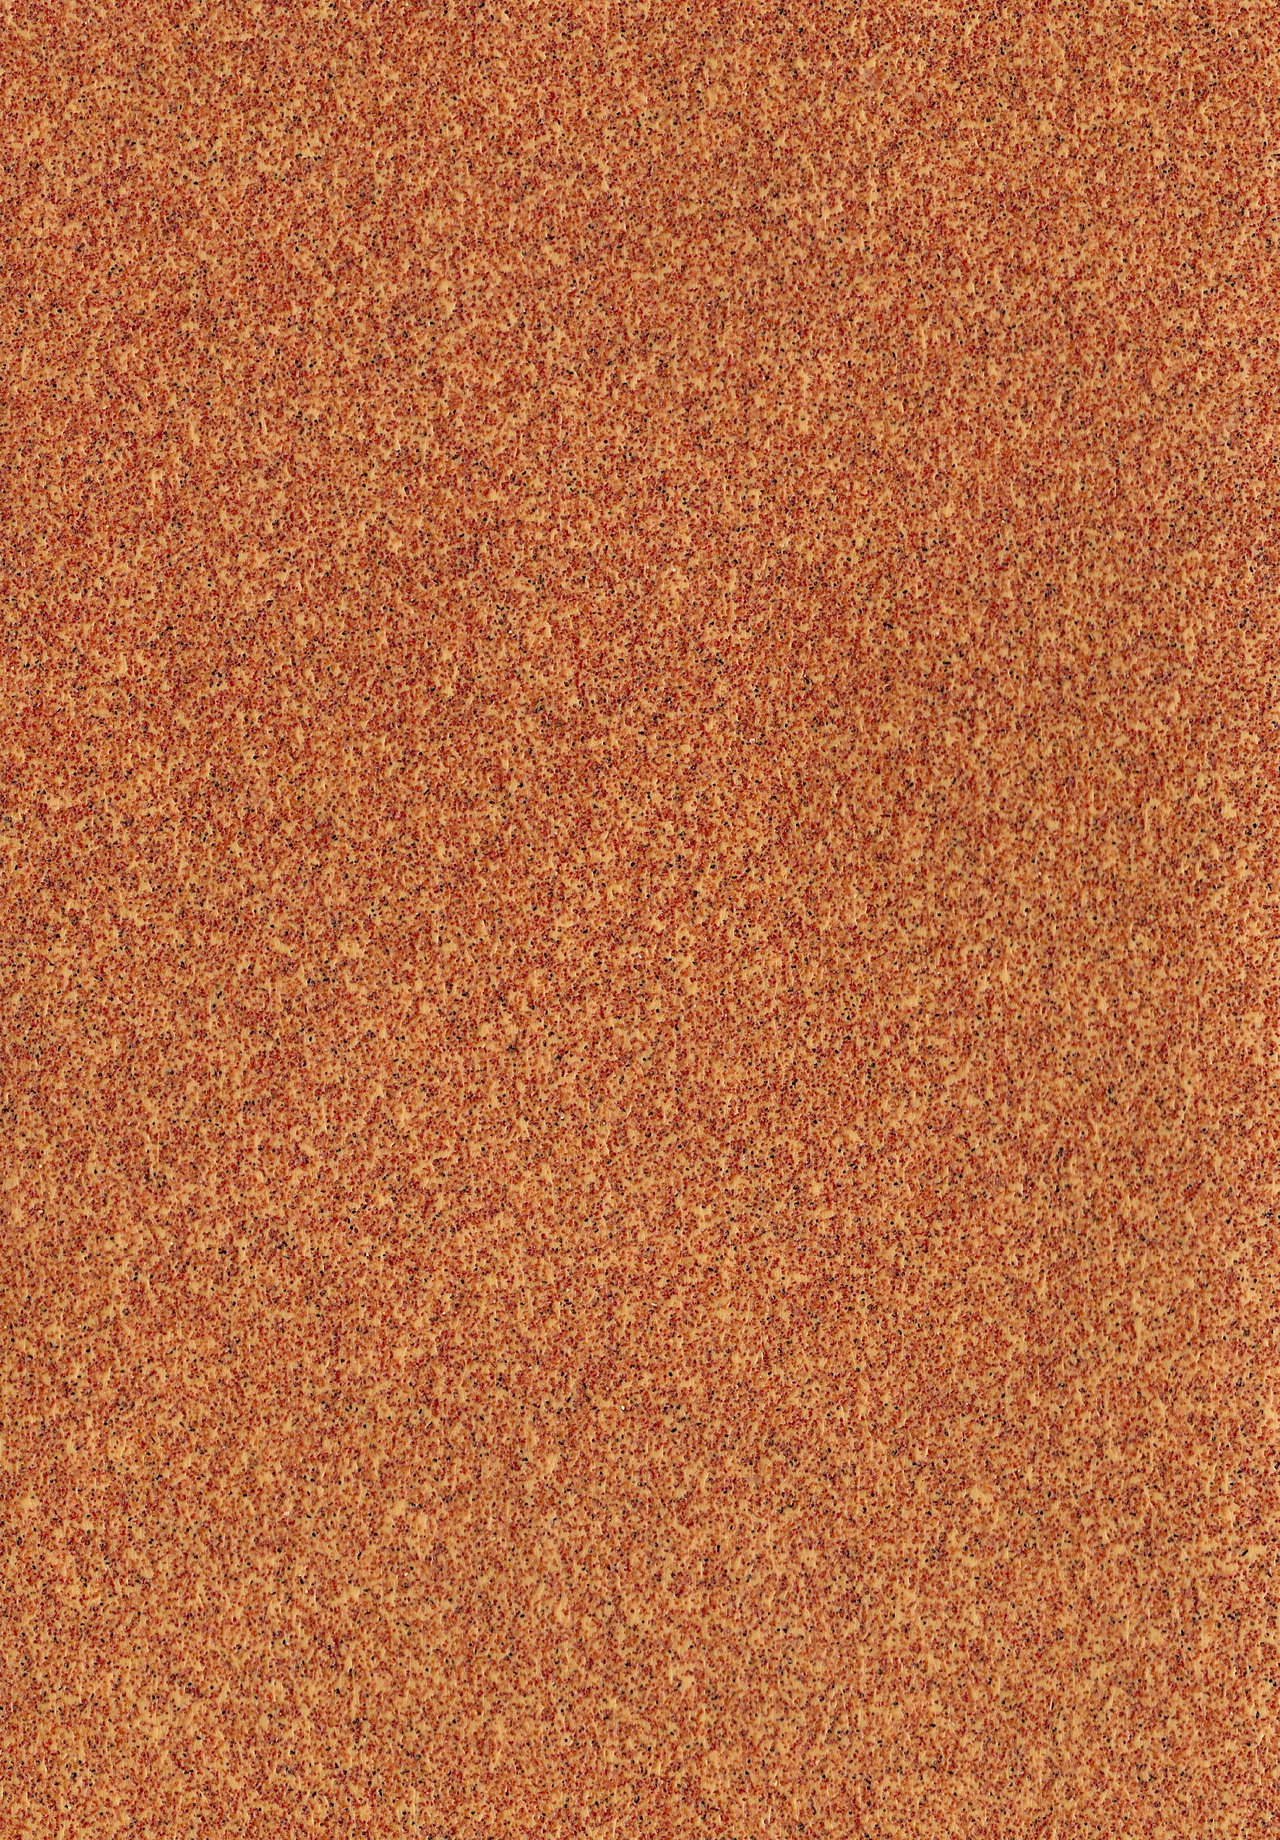 red sand, texture, background, download photo, red sand texture